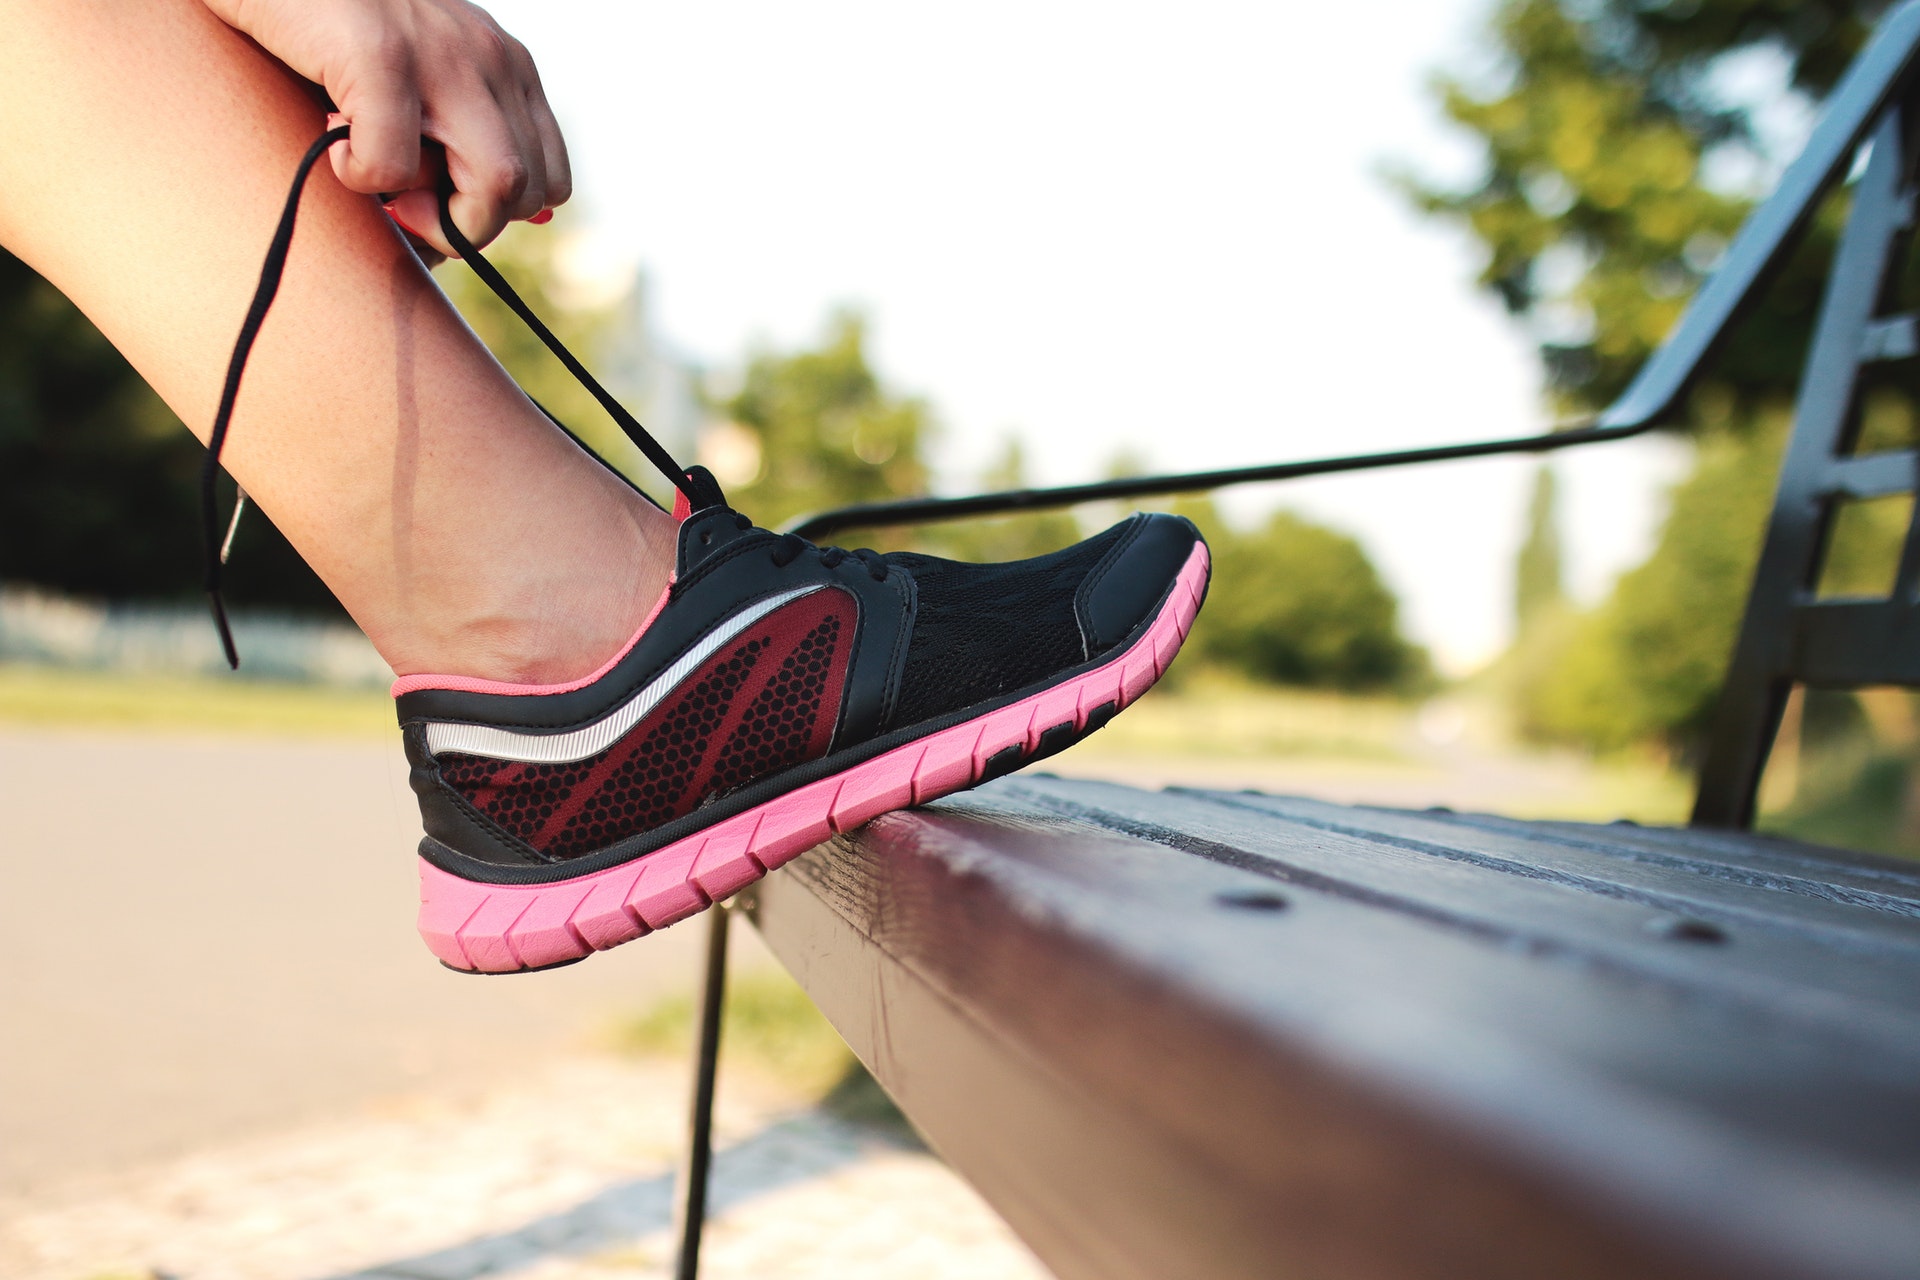 An image of a woman lacing up her running shoes on a bench.